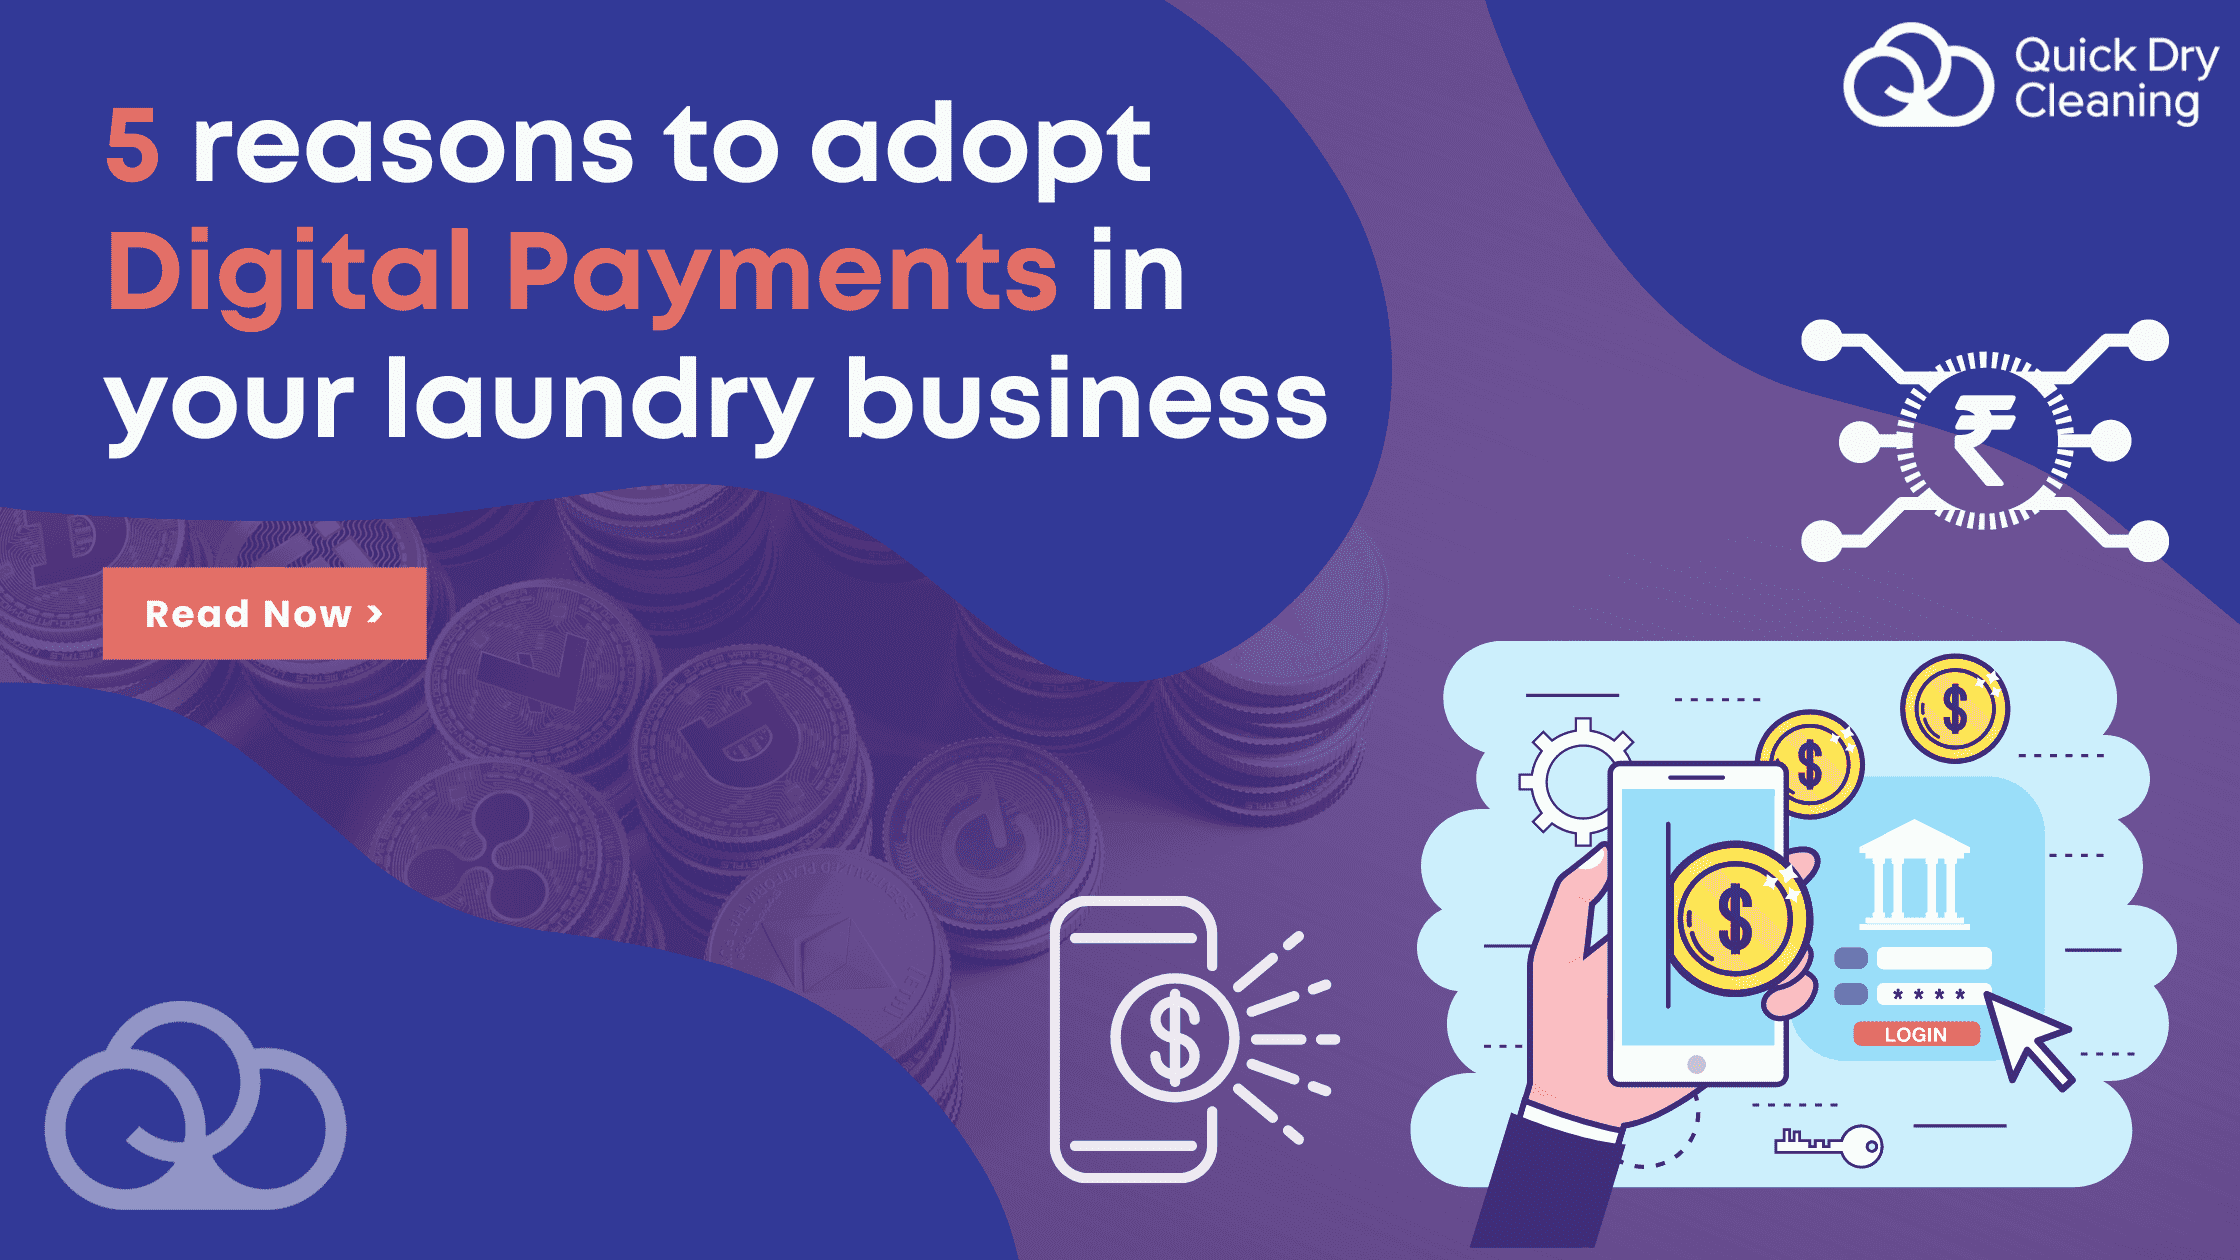 Adopt digital Payments in laundry business